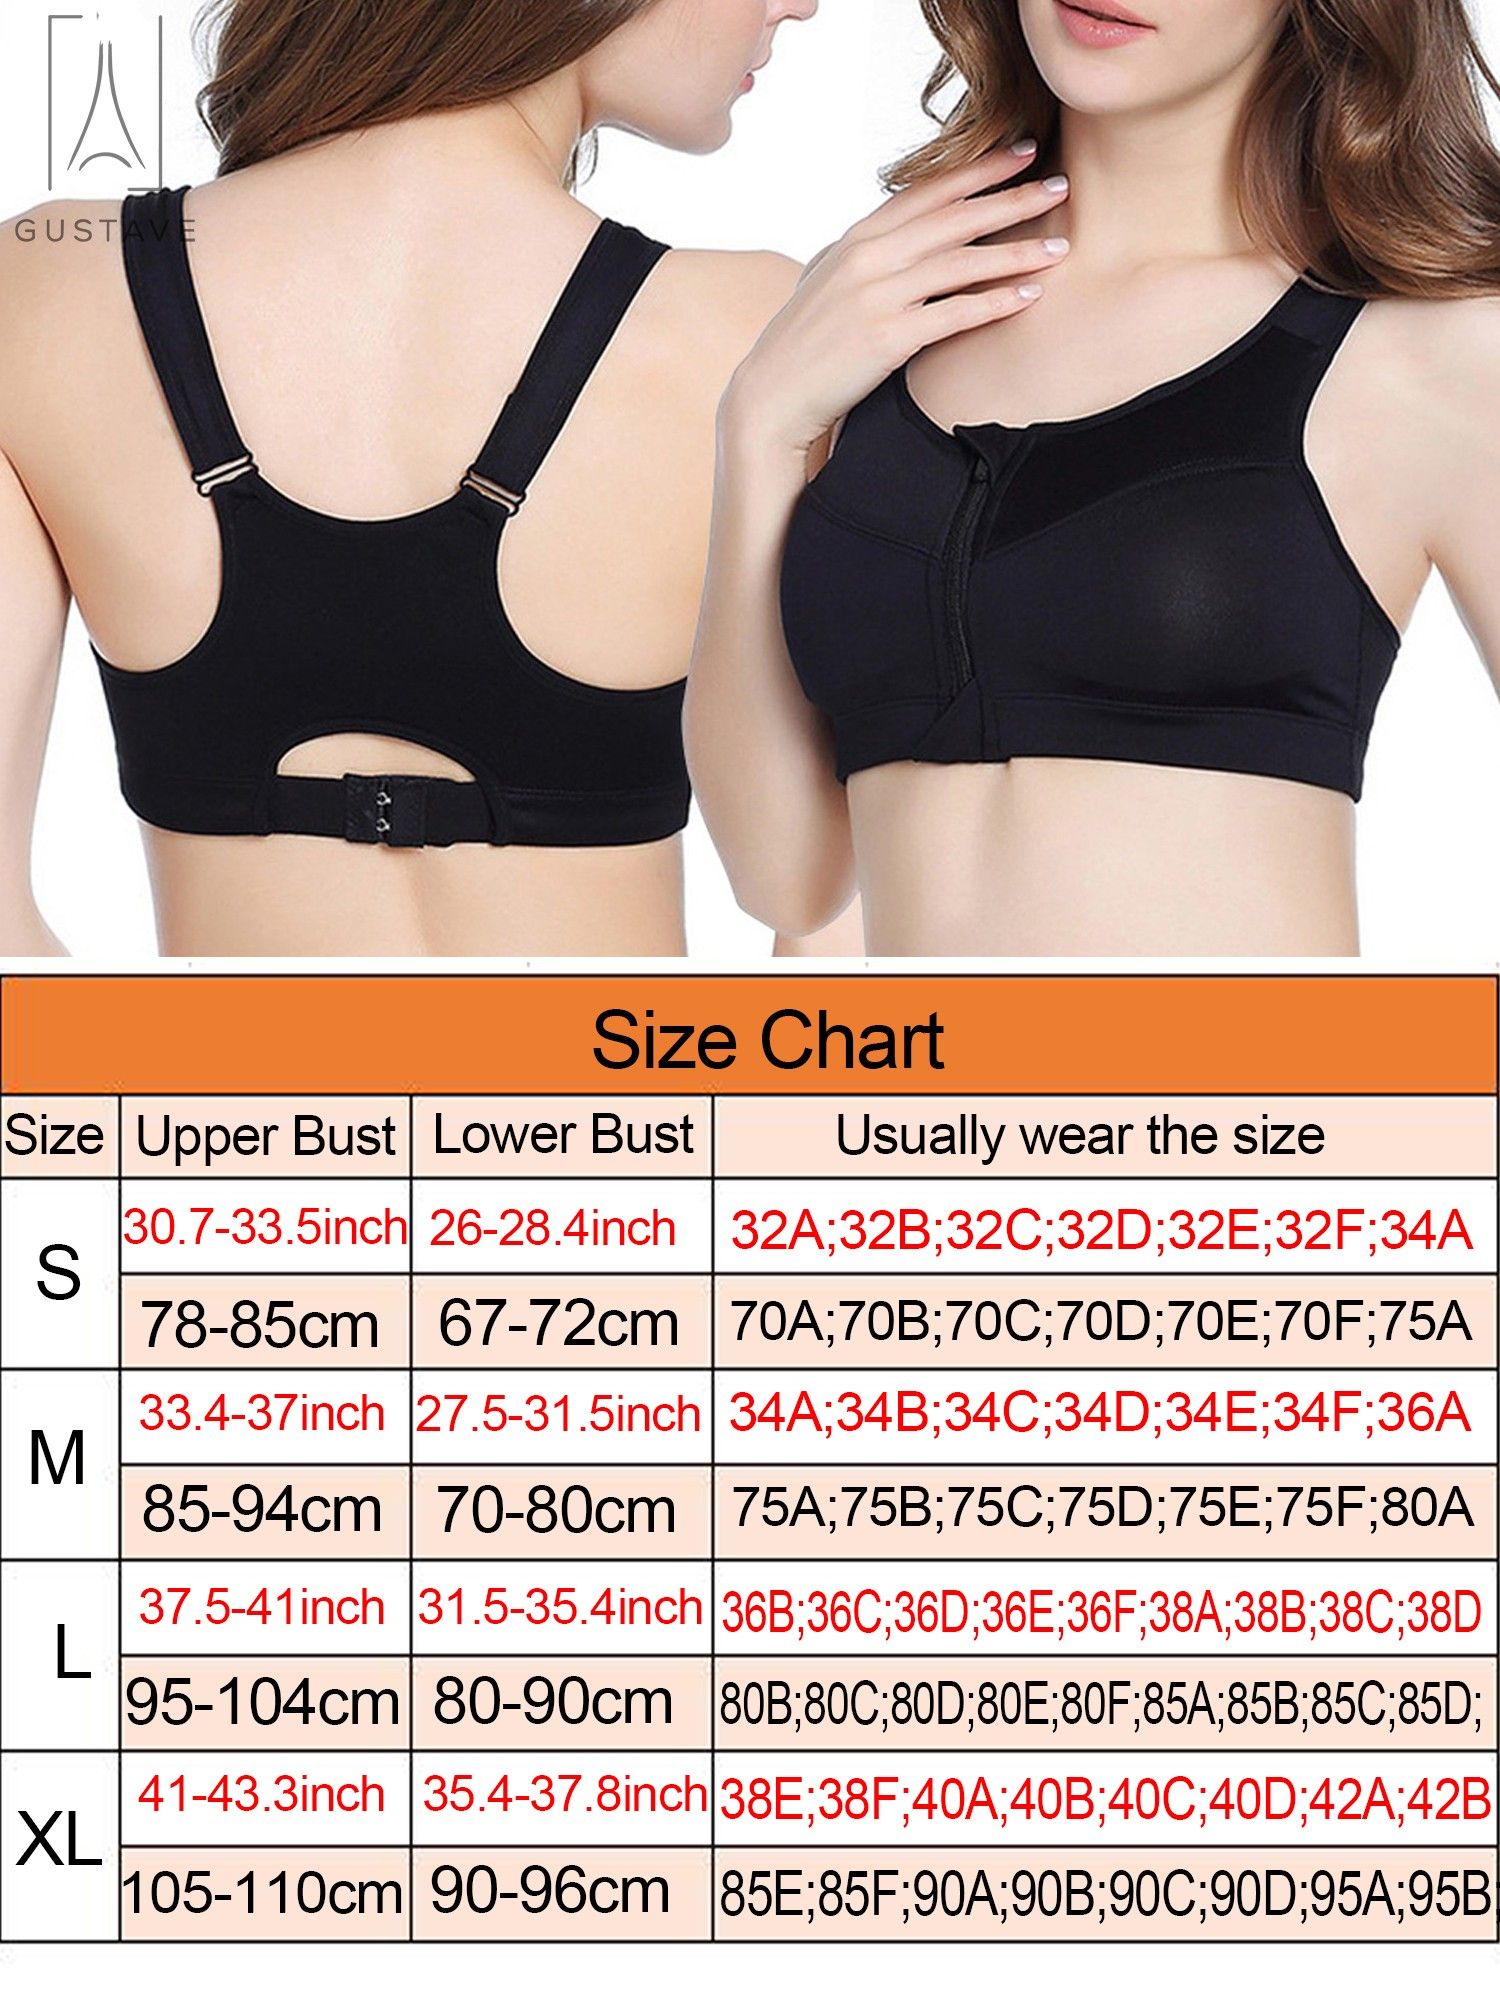 Gustave Women High Impact Front Zip Sports Bra Push Up Padded Workout Yoga Bras Wirefree Shockproof Fitness Vest Tops "Gray,L" - image 3 of 10